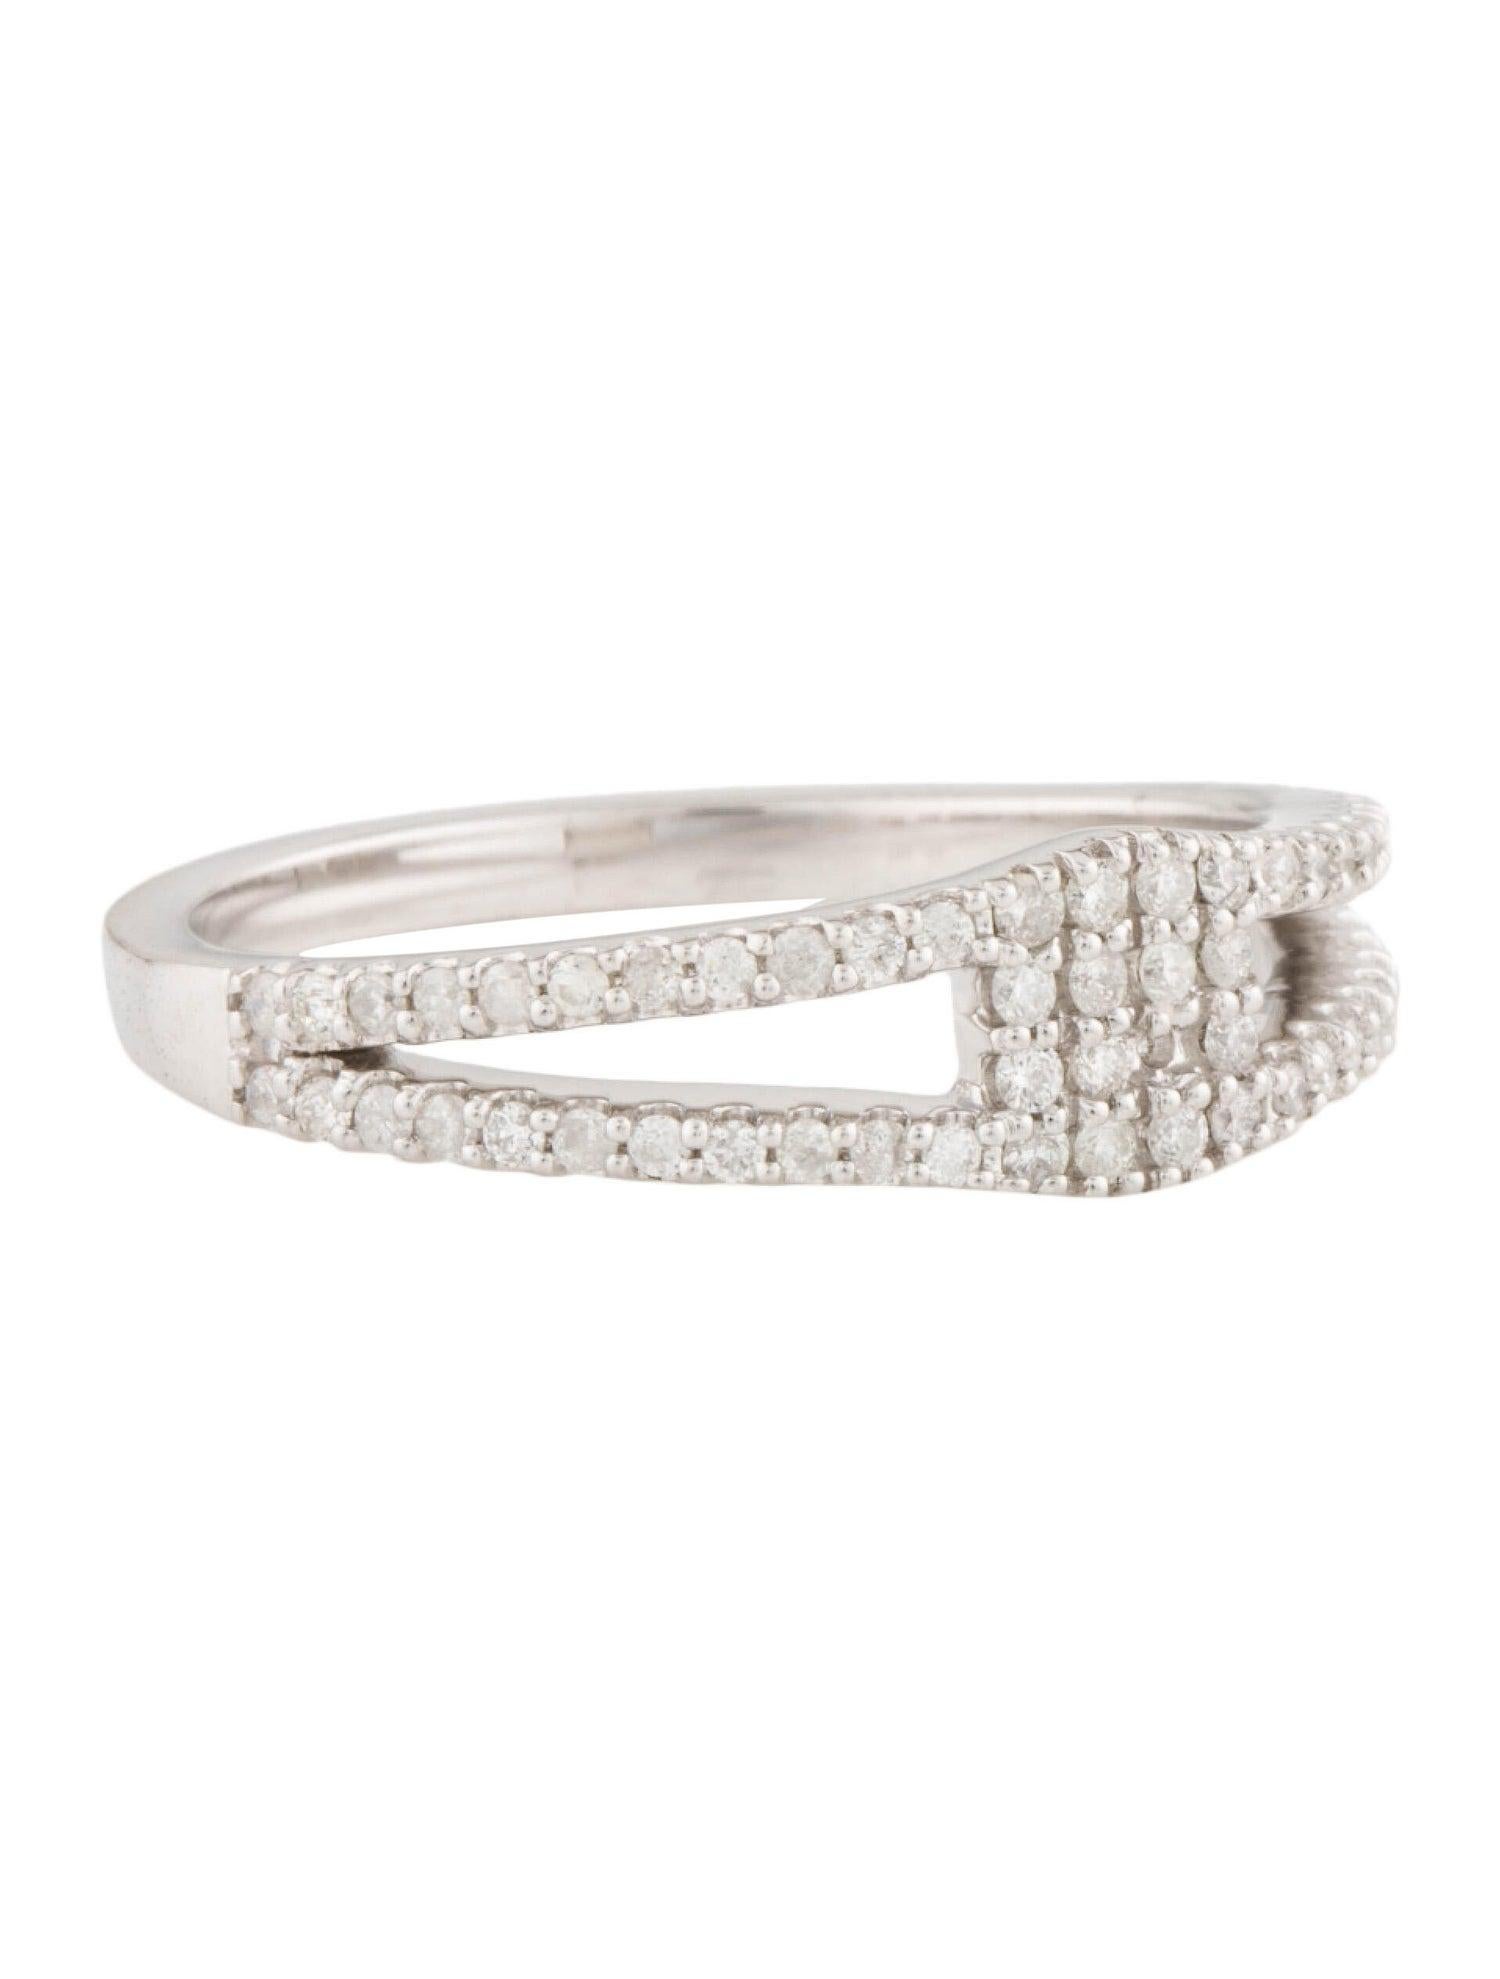 Elevate your jewelry collection with our exquisite 14K White Gold Diamond Band, a symbol of elegance and timeless beauty. This meticulously crafted band features 60 round brilliant cut diamonds, totaling 0.33 carats, set in luxurious 14K white gold.